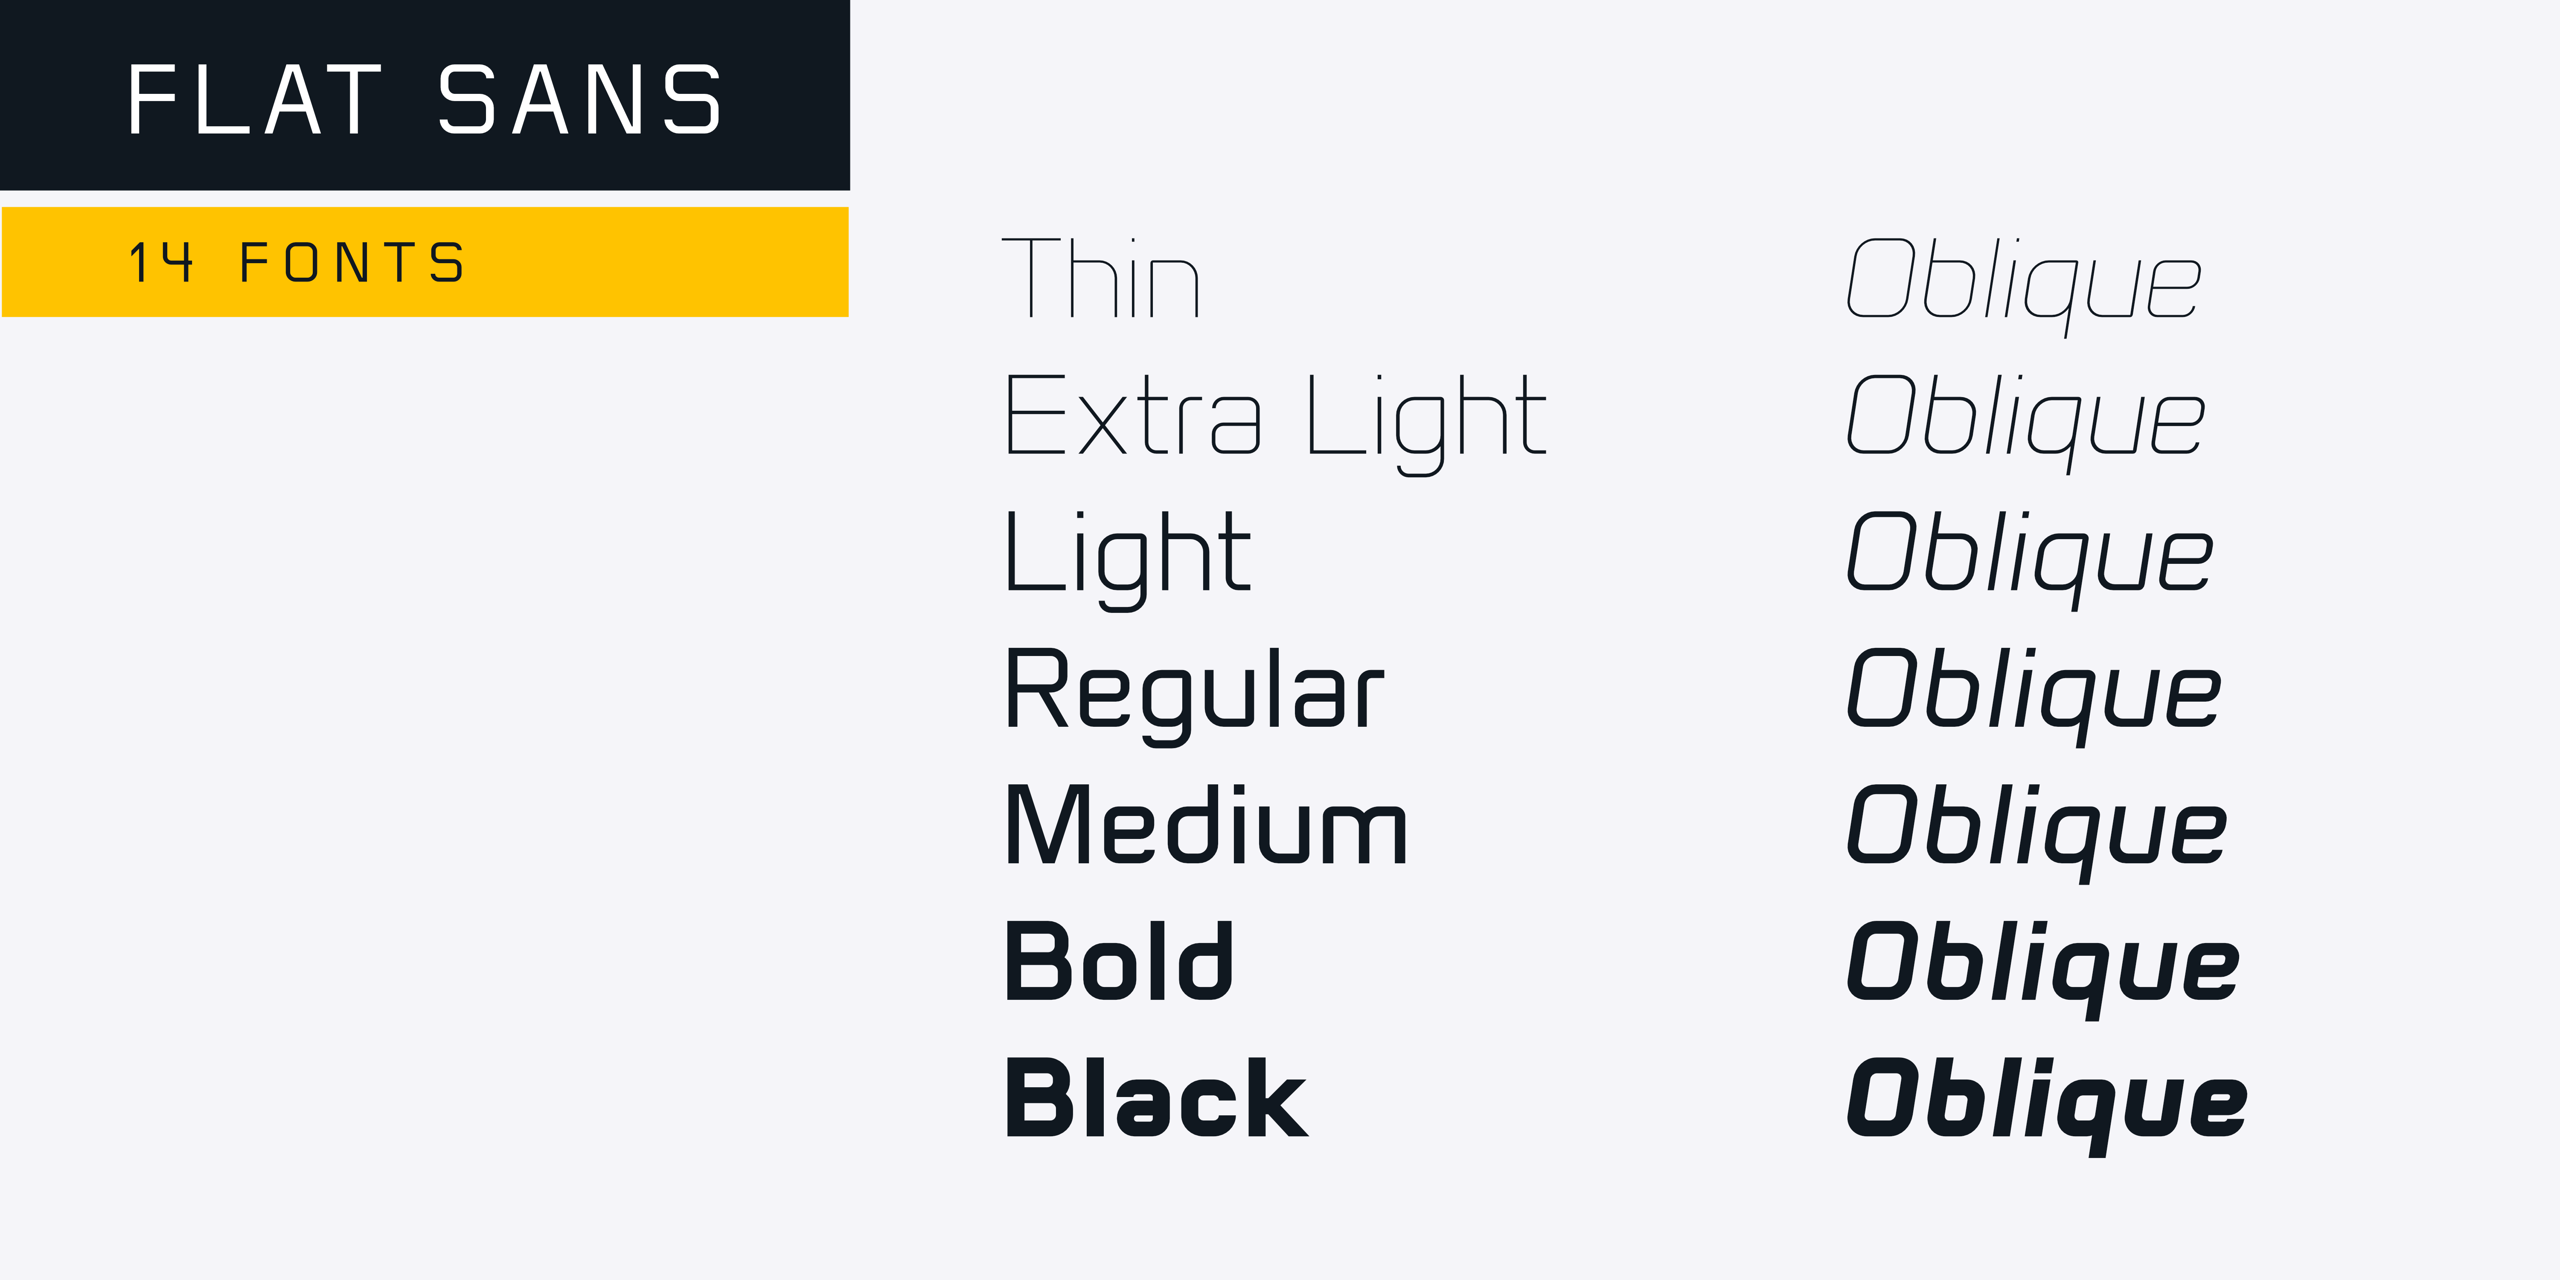 Flat Sans fonts and styles